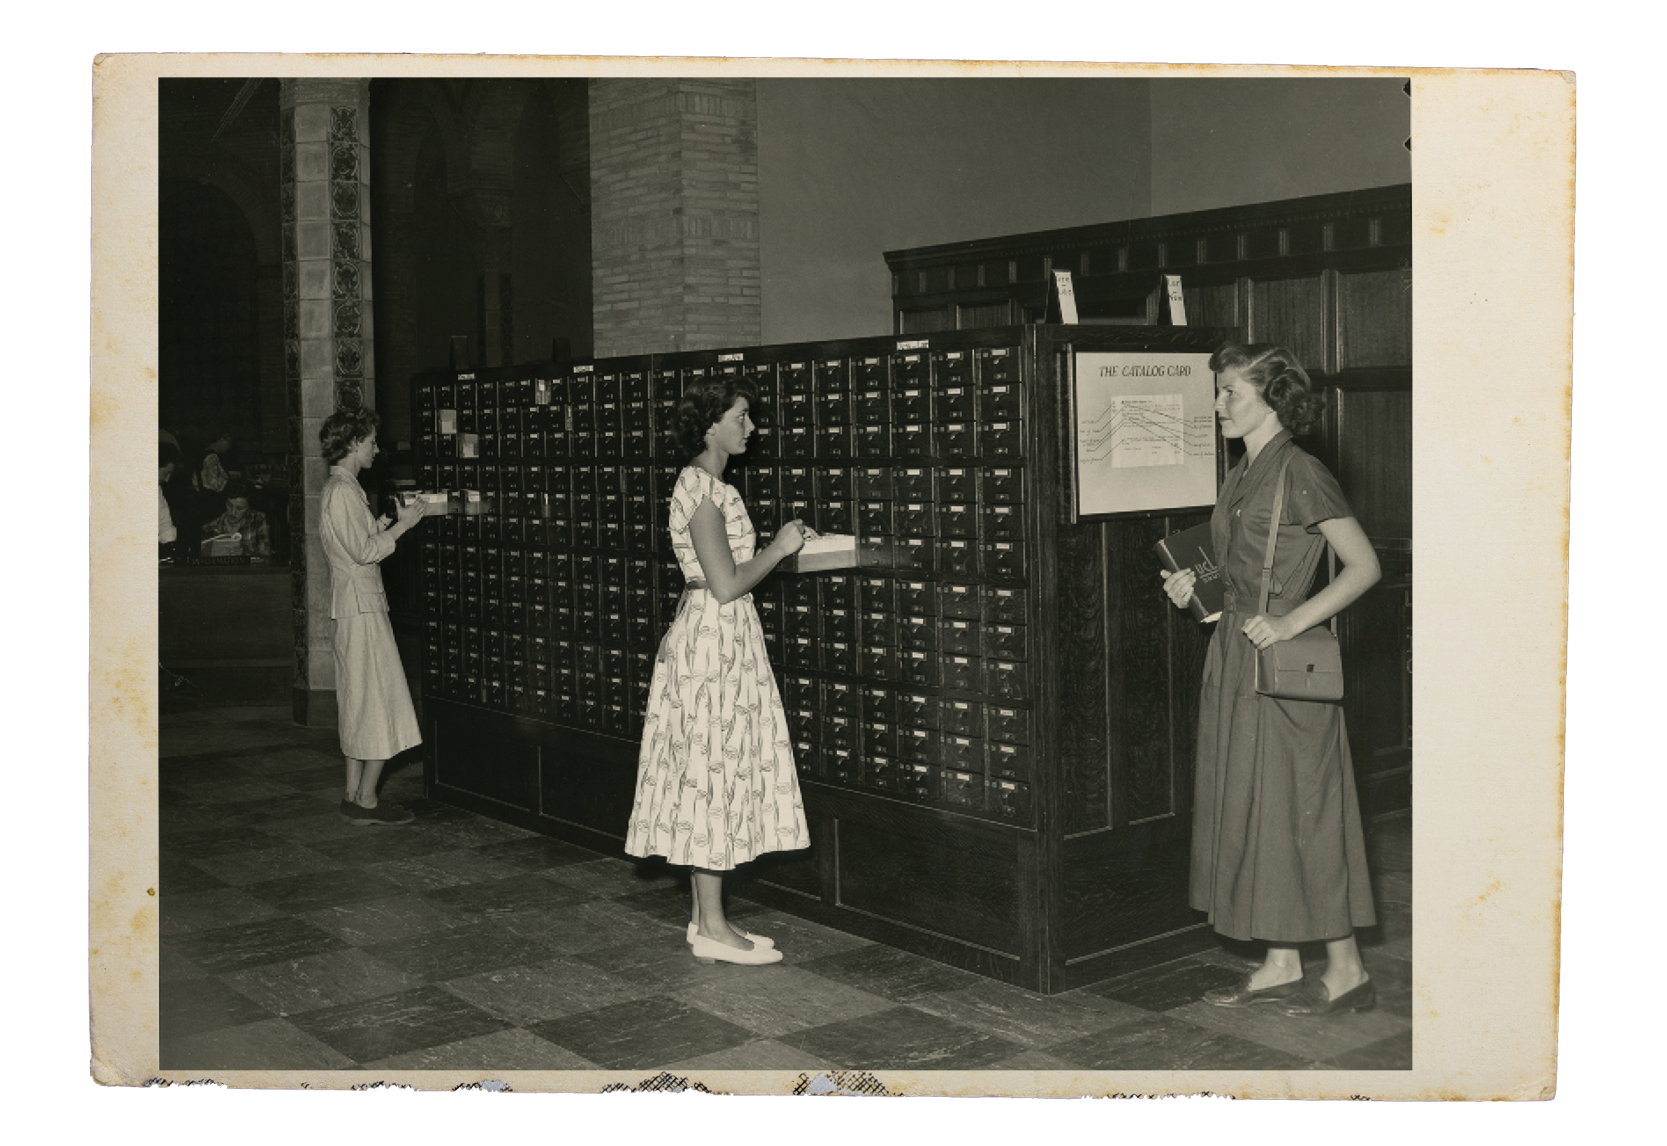 A black and white photograph of students huddled next to a library card catalog cabinet.